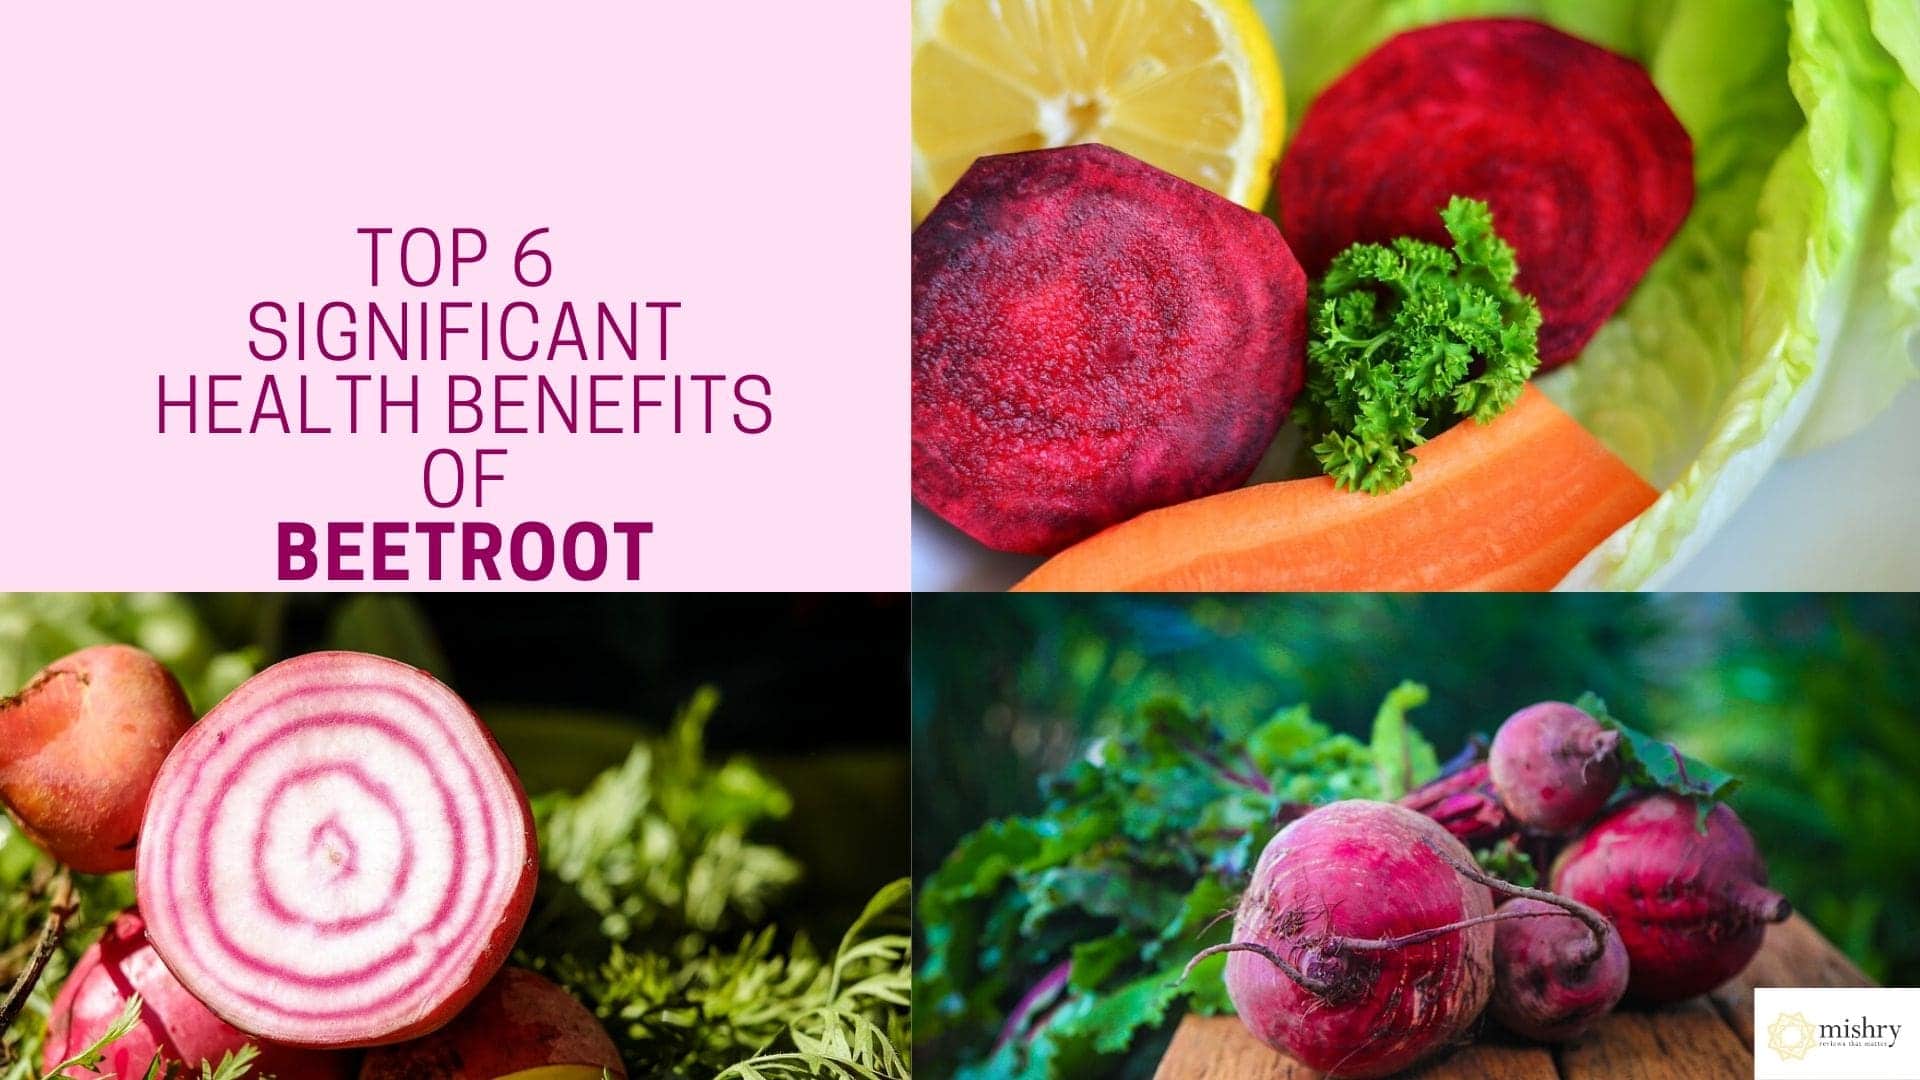 Top 6 significant Benefits of beetroot